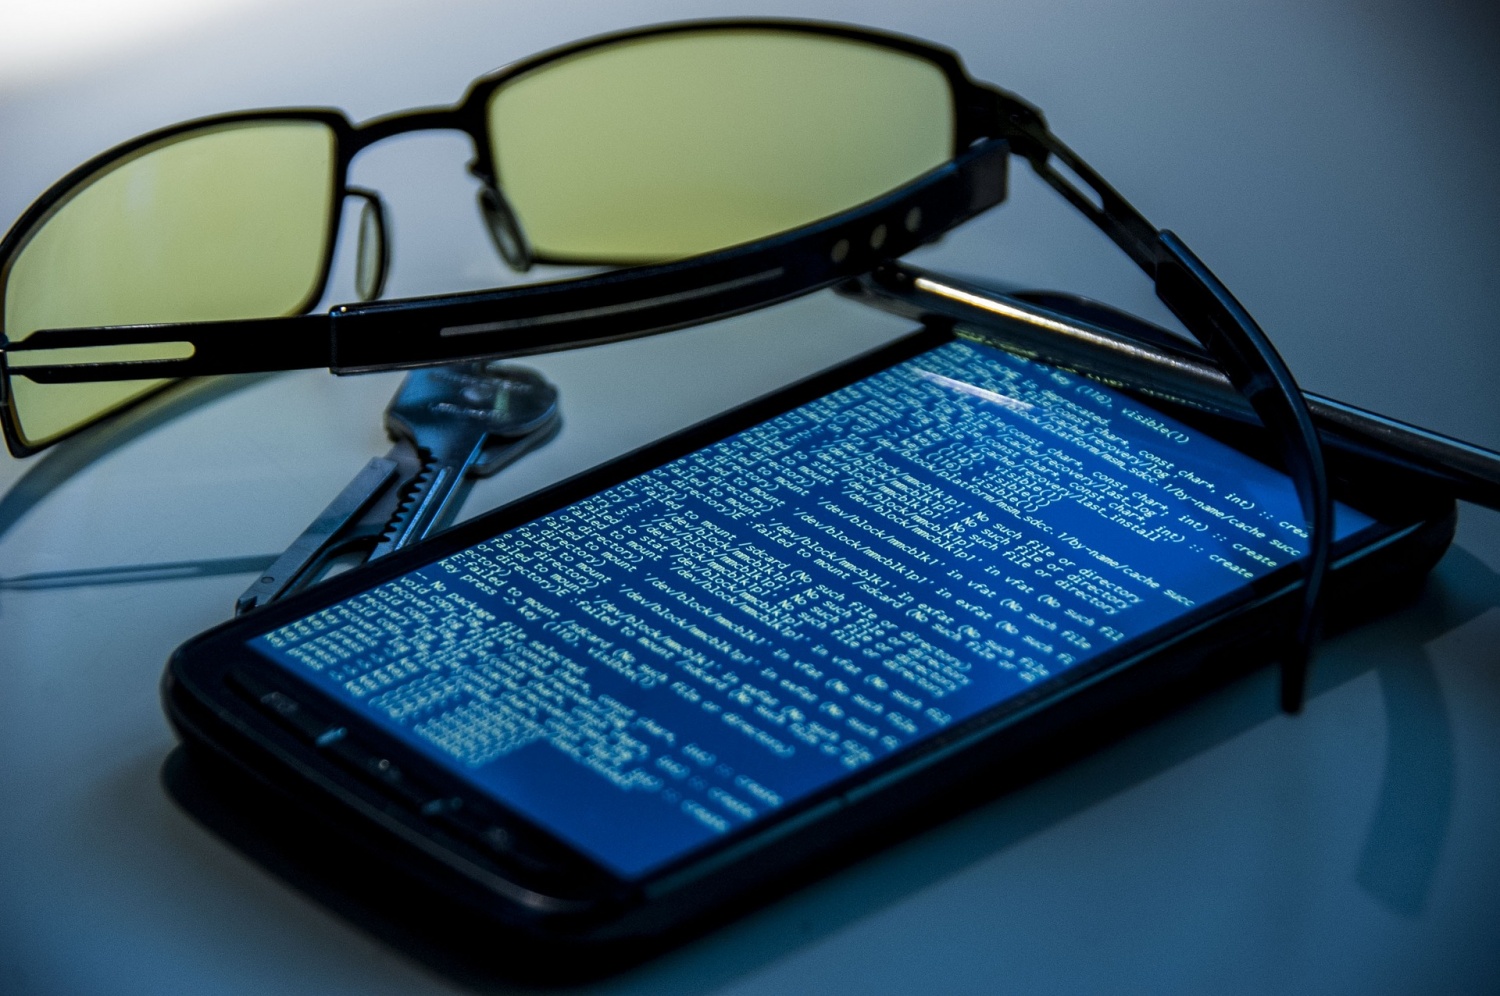 5 ways mobile devices are the biggest threat to cybersecurity